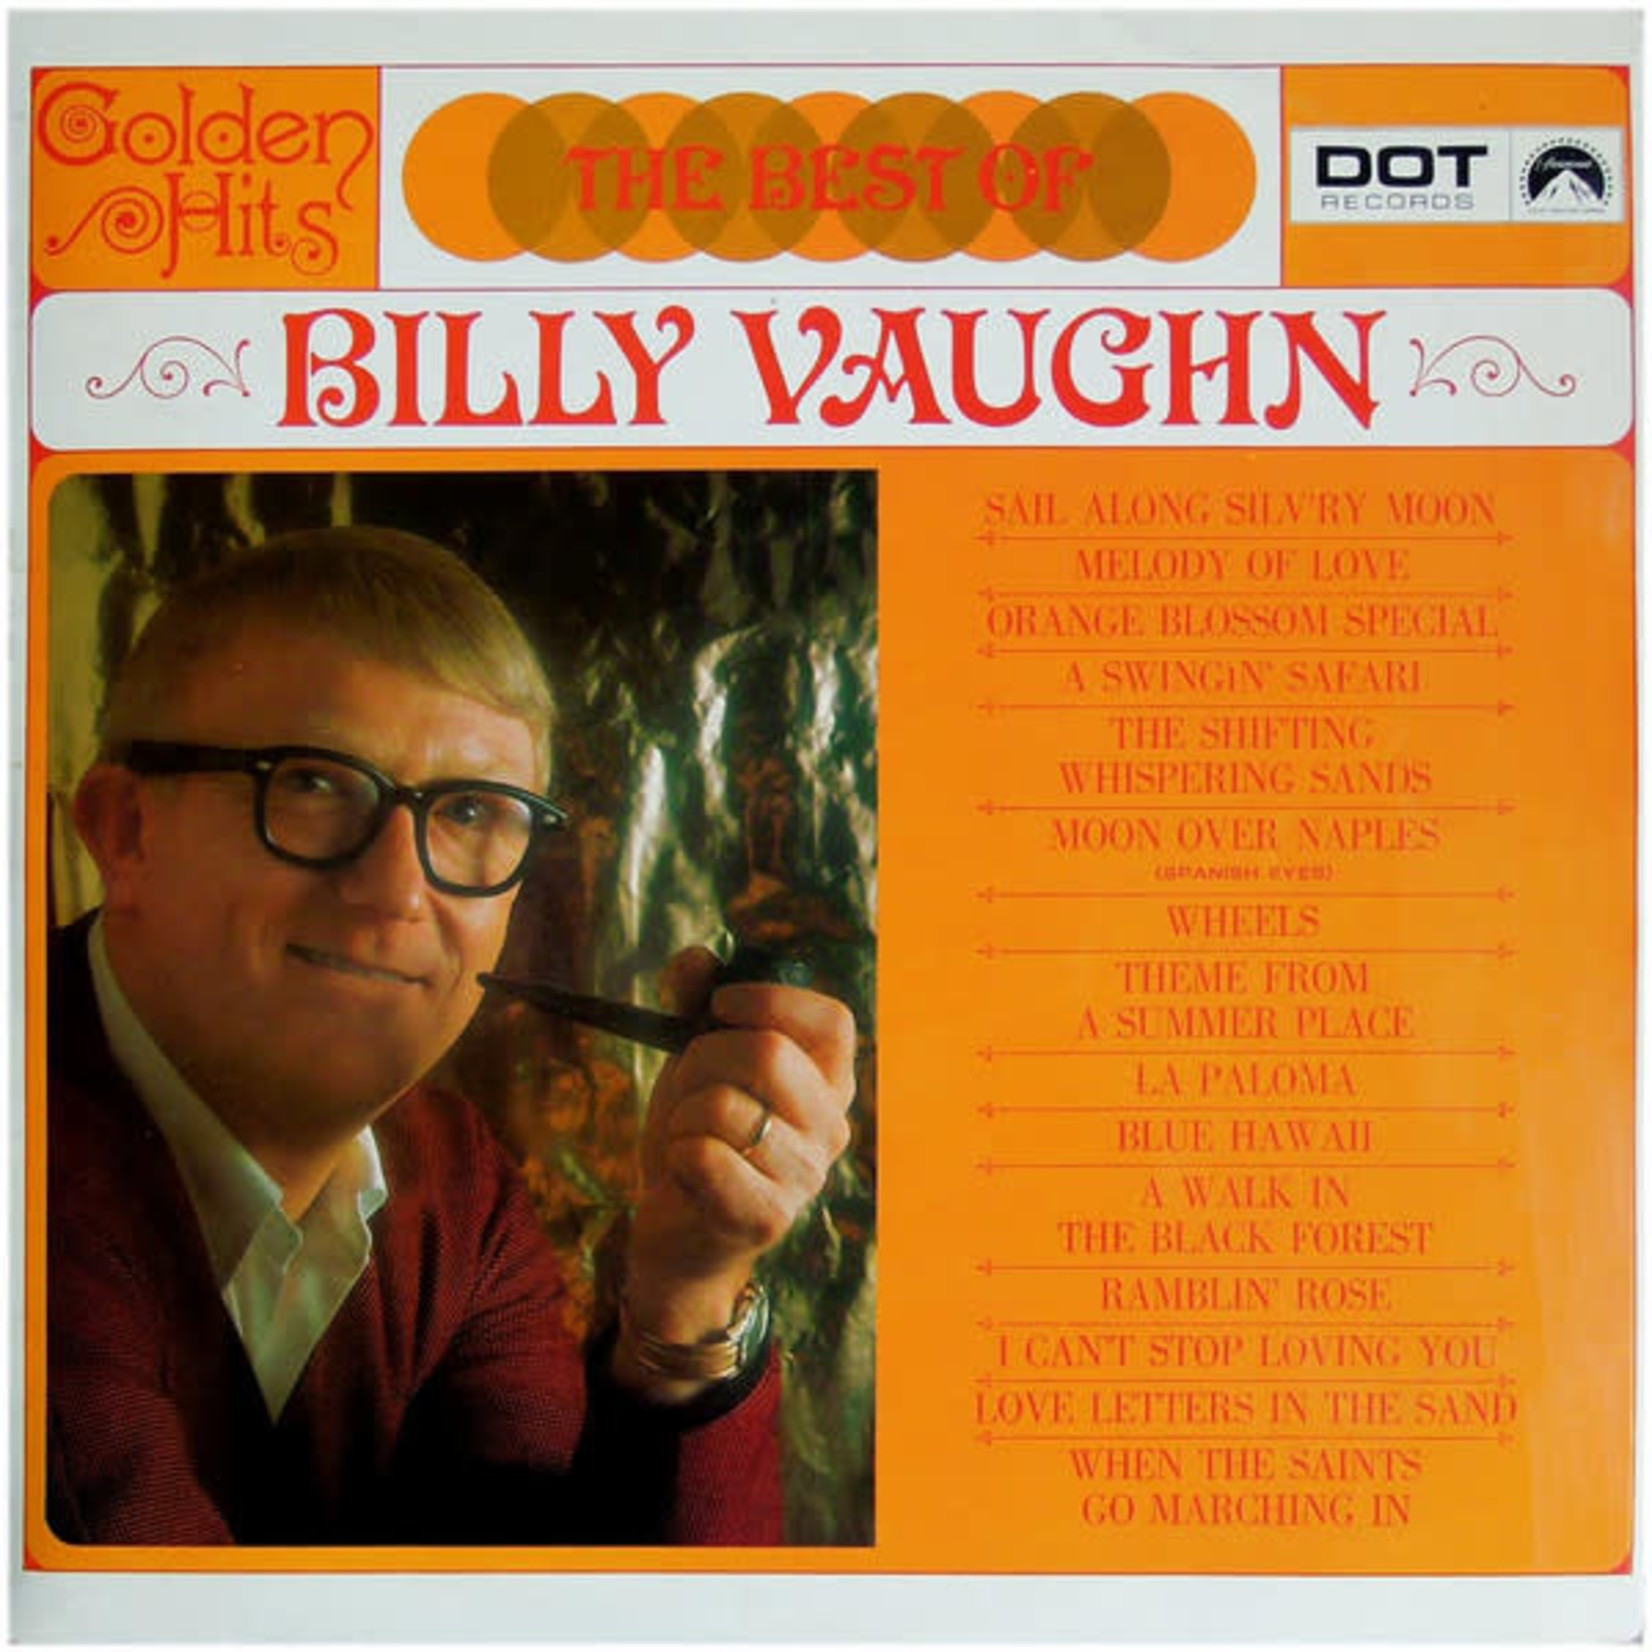 [Discontinued] Billy Vaughn - Golden Hits/Best of/Million Sellers